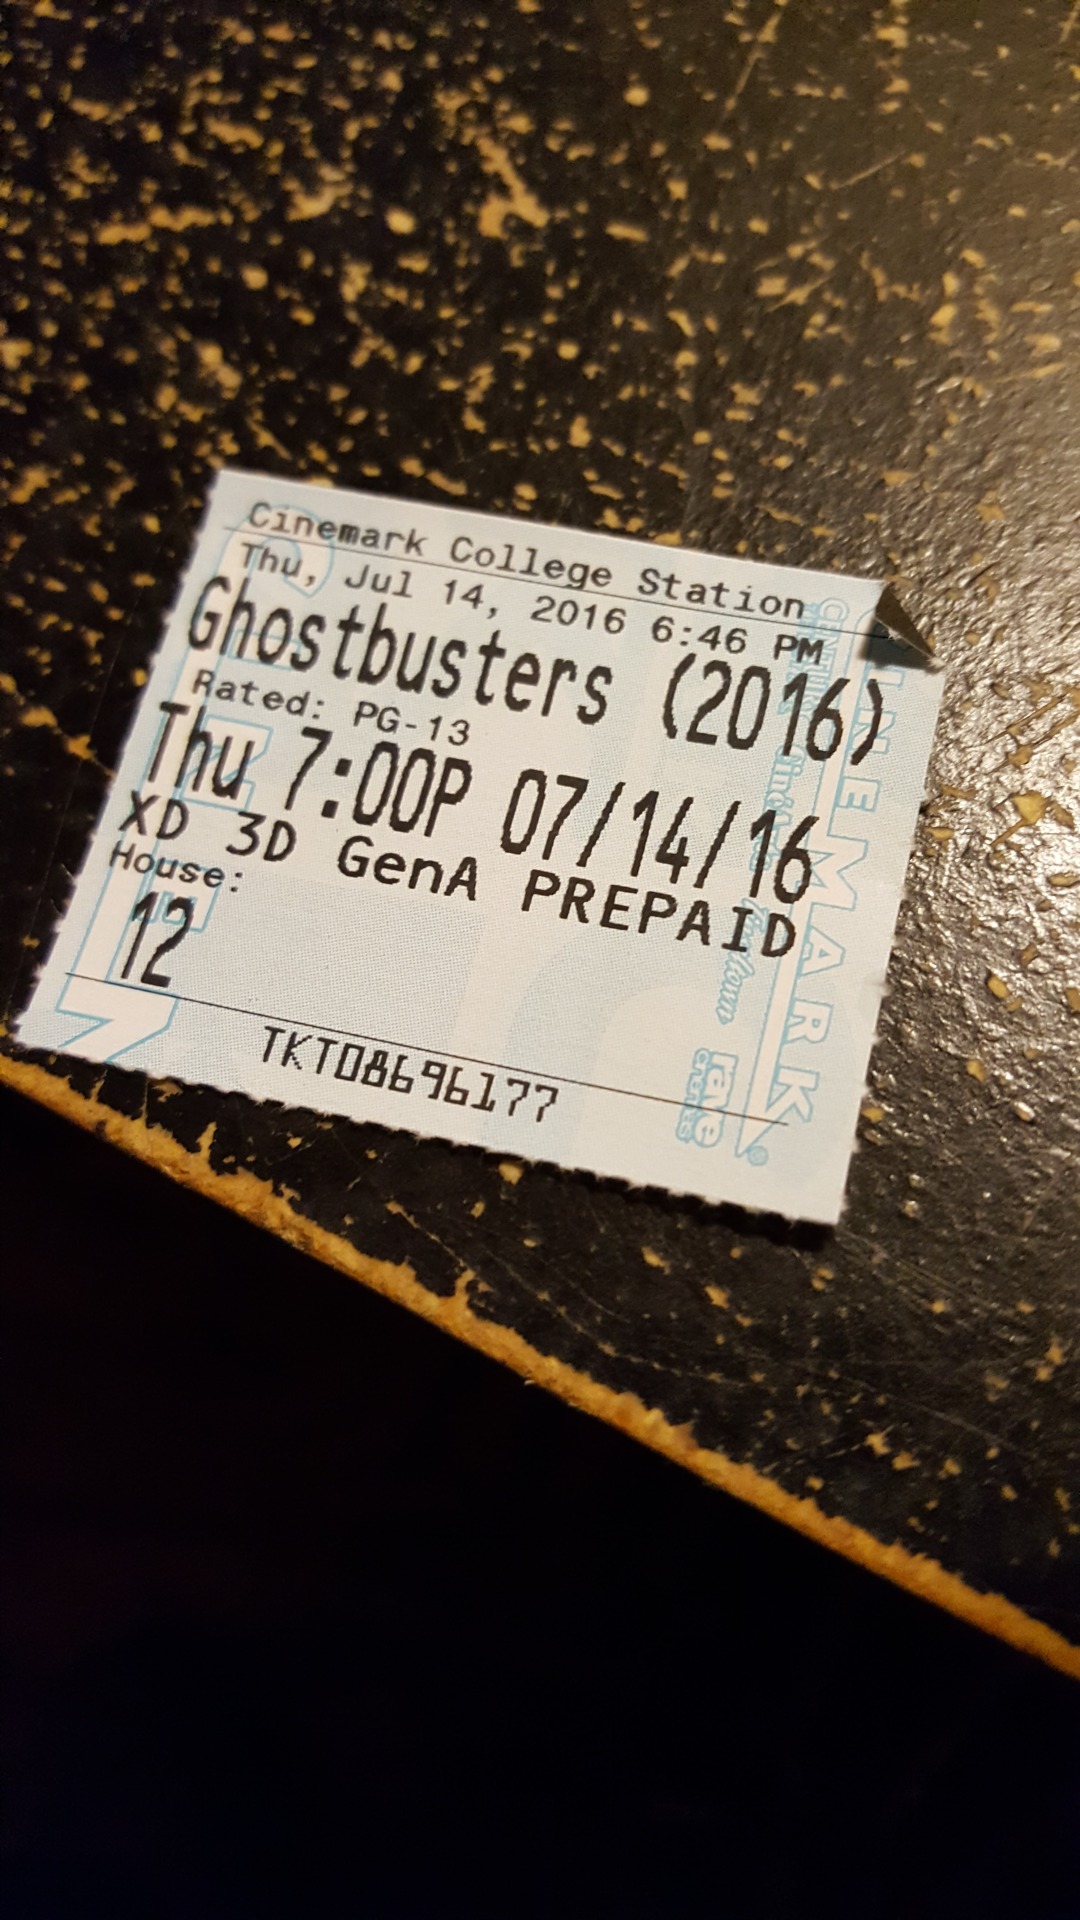 dacommissioner2k15:  Just getting settled in from making back to the theaters. Ghostbusters